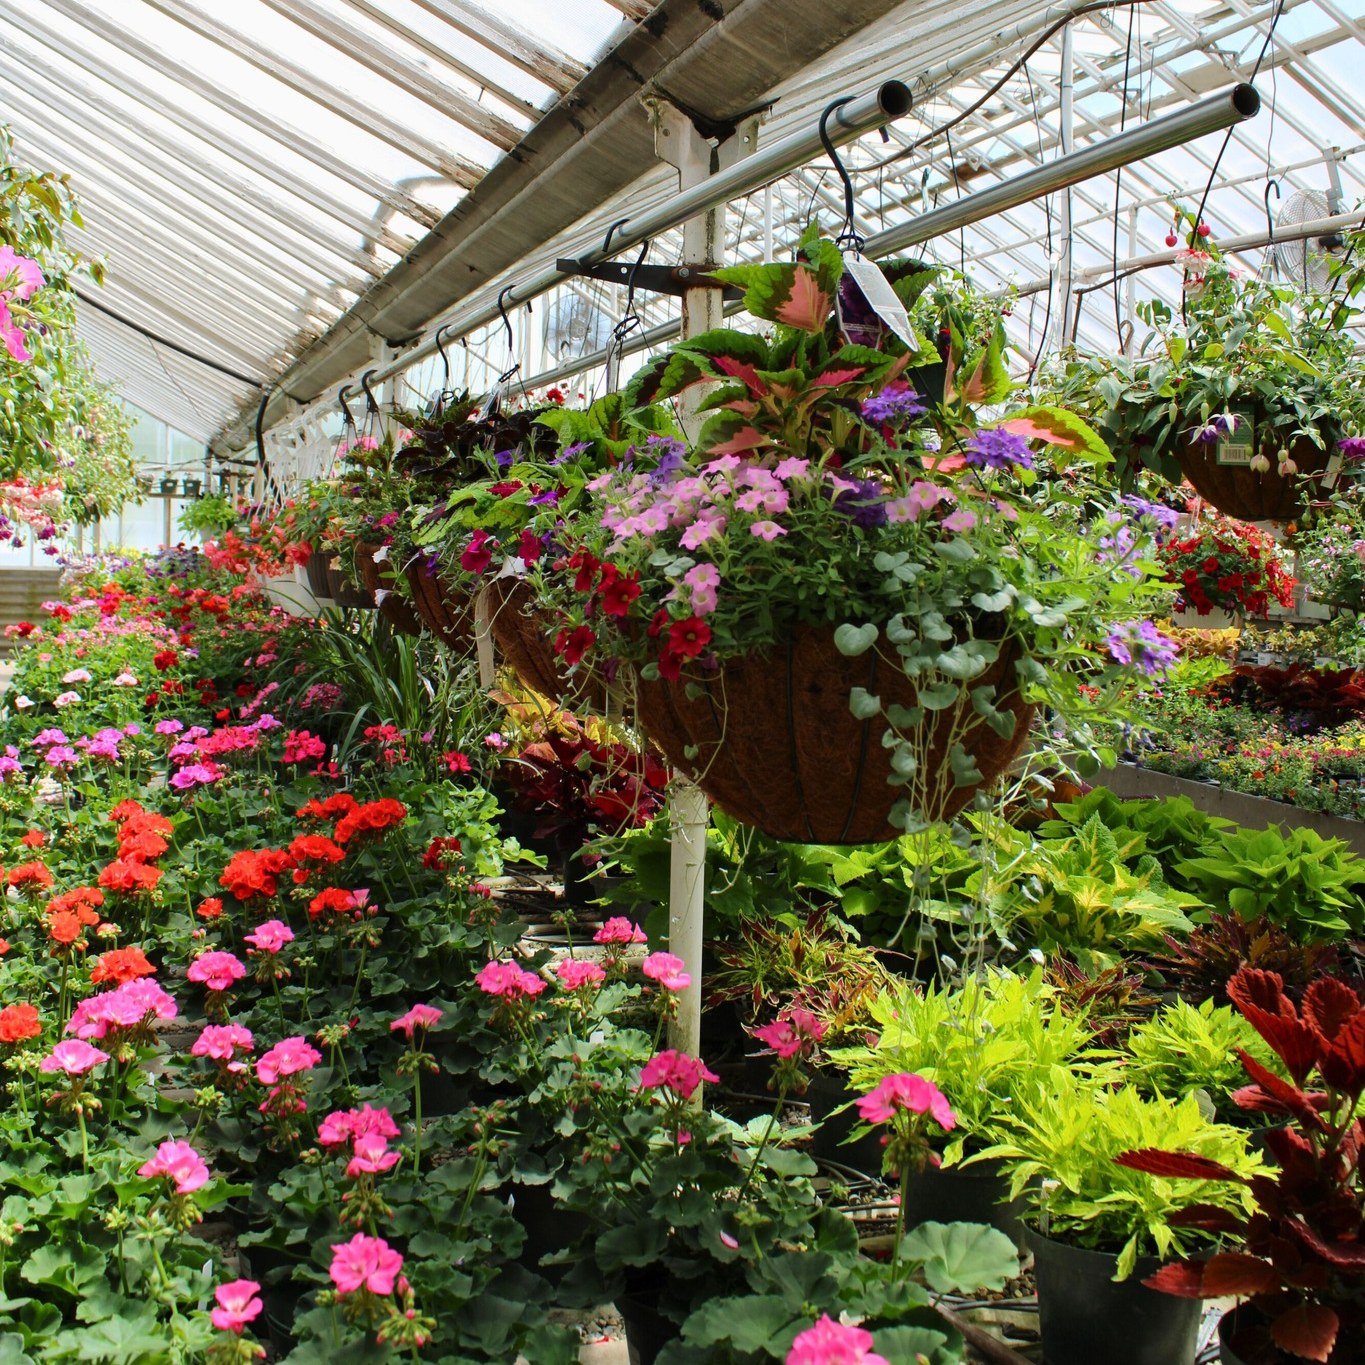 MOTHER'S DAY is THIS SUNDAY! 🌸 May 12th! She's the root of the family after all, why not celebrate mom with the gift of greenery? We have hundreds of hanging baskets, mixed pots, trees, perennials, and shrubs she&rsquo;ll surely love!

Open Monday-S